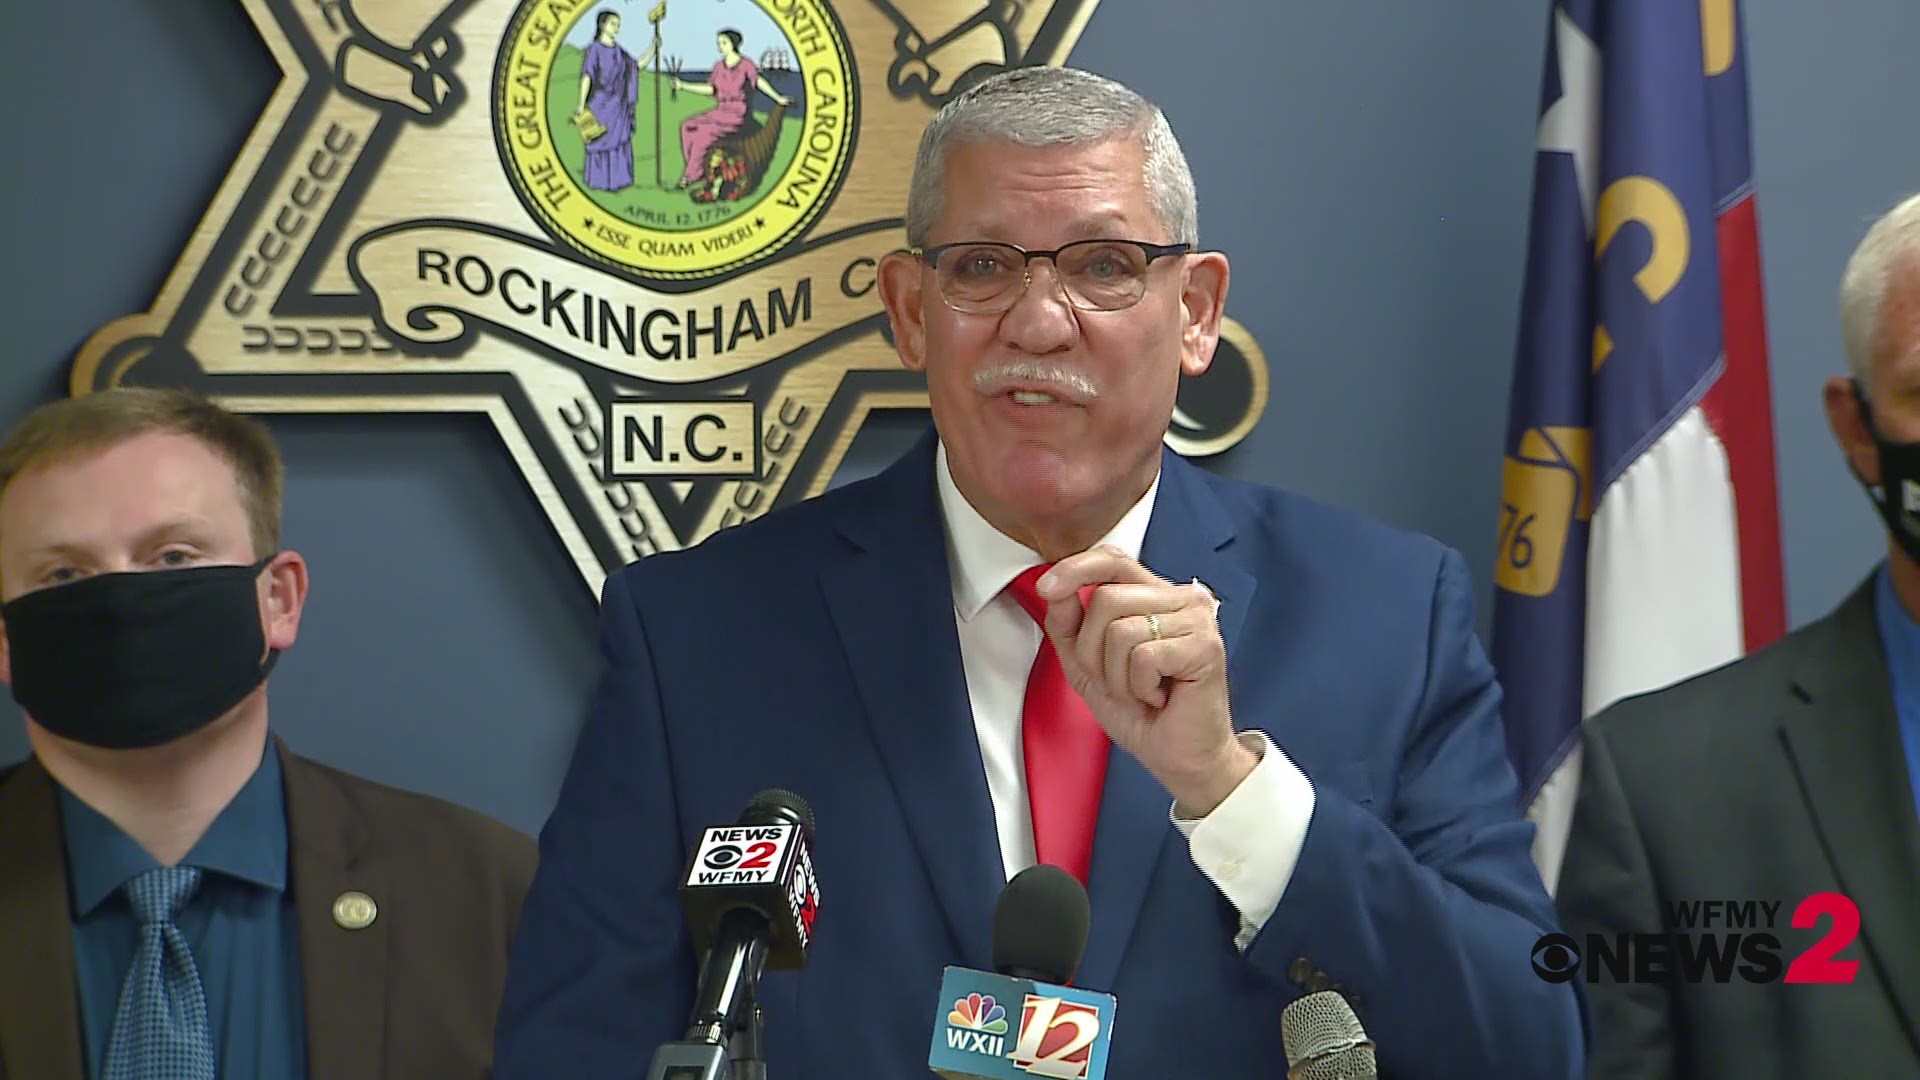 Sheriff Sam Page delivers remarks on the 'Draper City Goodfellas'